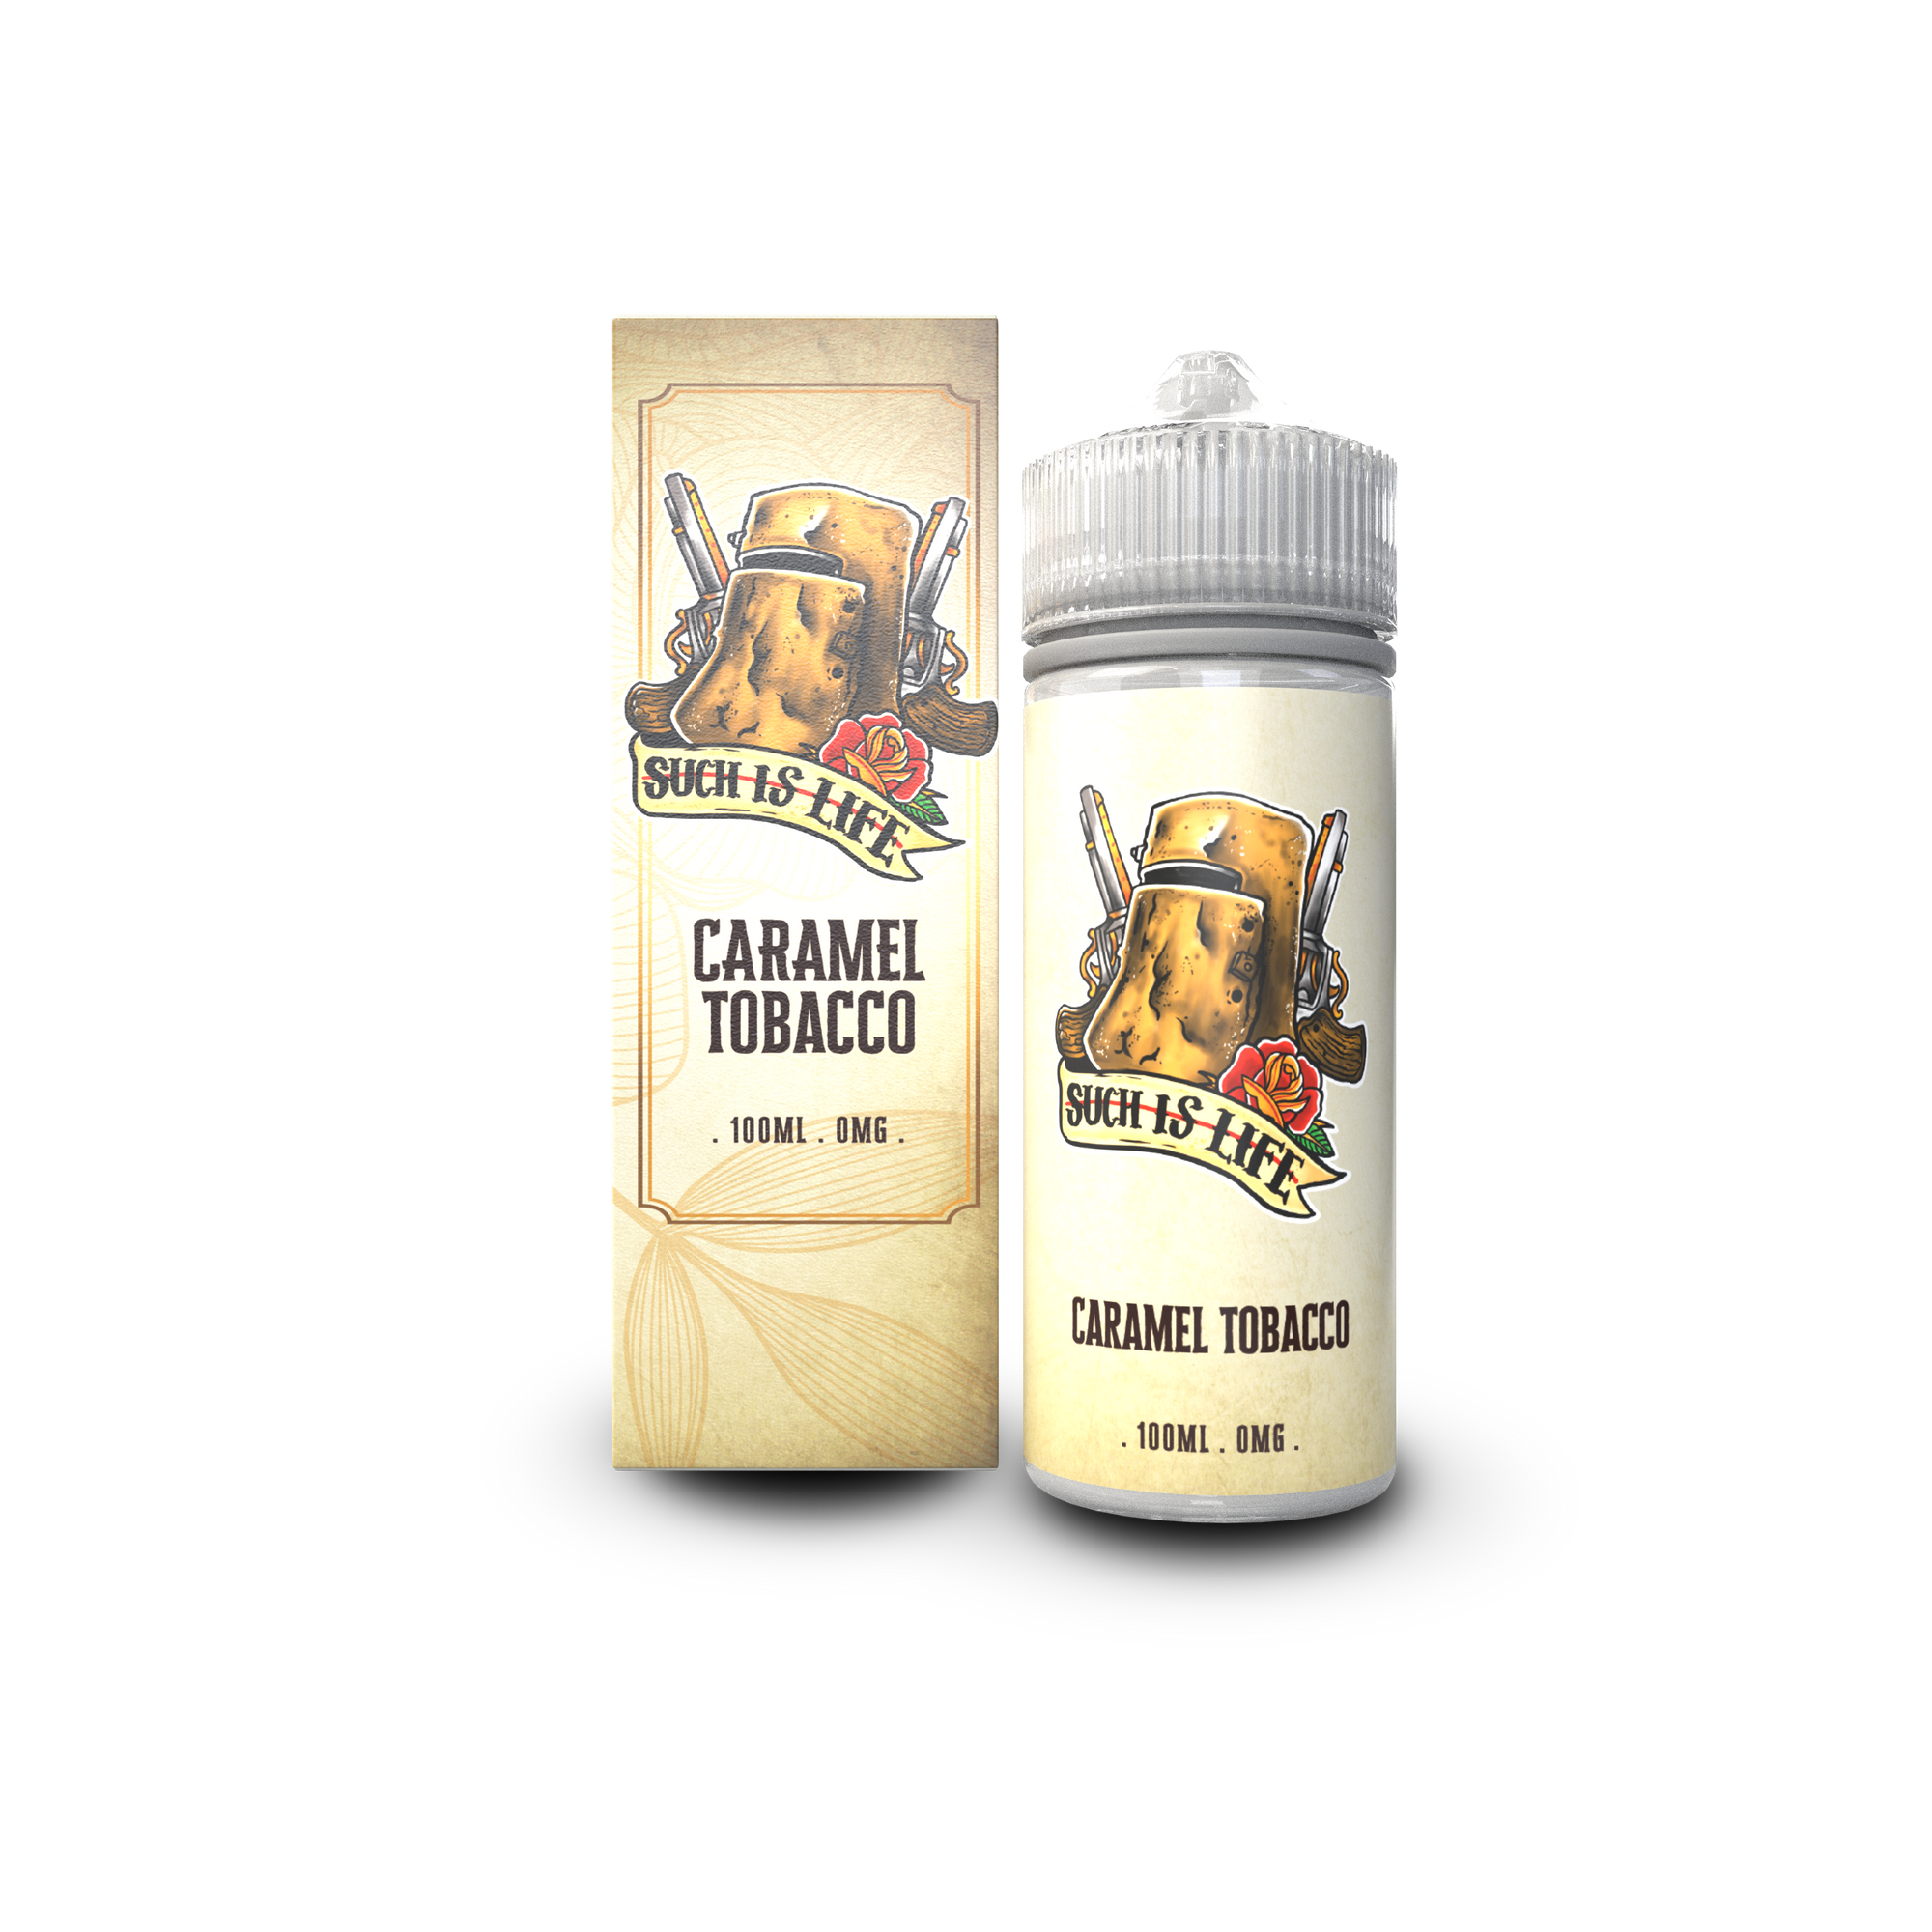 Buy Caramel Tobacco By Such As Life Eliquids - Wick and Wire Co Melbourne Vape Shop, Victoria Australia